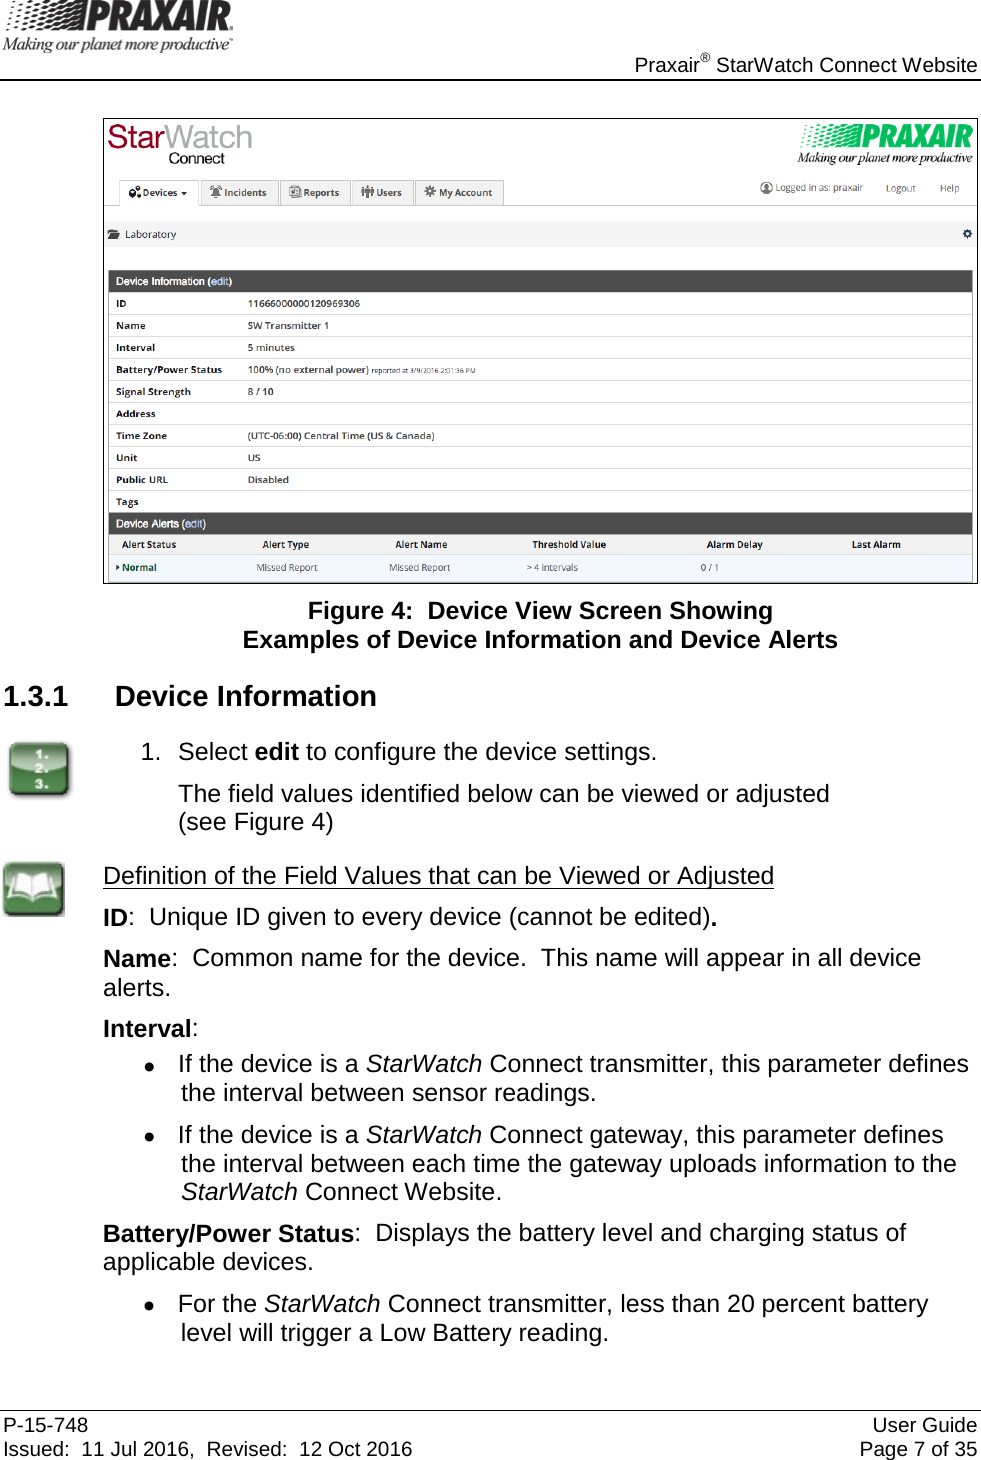    Praxair® StarWatch Connect Website P-15-748 User Guide Issued:  11 Jul 2016,  Revised:  12 Oct 2016 Page 7 of 35   Figure 4:  Device View Screen Showing  Examples of Device Information and Device Alerts 1.3.1 Device Information  1. Select edit to configure the device settings.   The field values identified below can be viewed or adjusted  (see Figure 4)  Definition of the Field Values that can be Viewed or Adjusted ID:  Unique ID given to every device (cannot be edited).  Name:  Common name for the device.  This name will appear in all device alerts. Interval:   • If the device is a StarWatch Connect transmitter, this parameter defines the interval between sensor readings.   • If the device is a StarWatch Connect gateway, this parameter defines the interval between each time the gateway uploads information to the StarWatch Connect Website. Battery/Power Status:  Displays the battery level and charging status of applicable devices.   • For the StarWatch Connect transmitter, less than 20 percent battery level will trigger a Low Battery reading.   